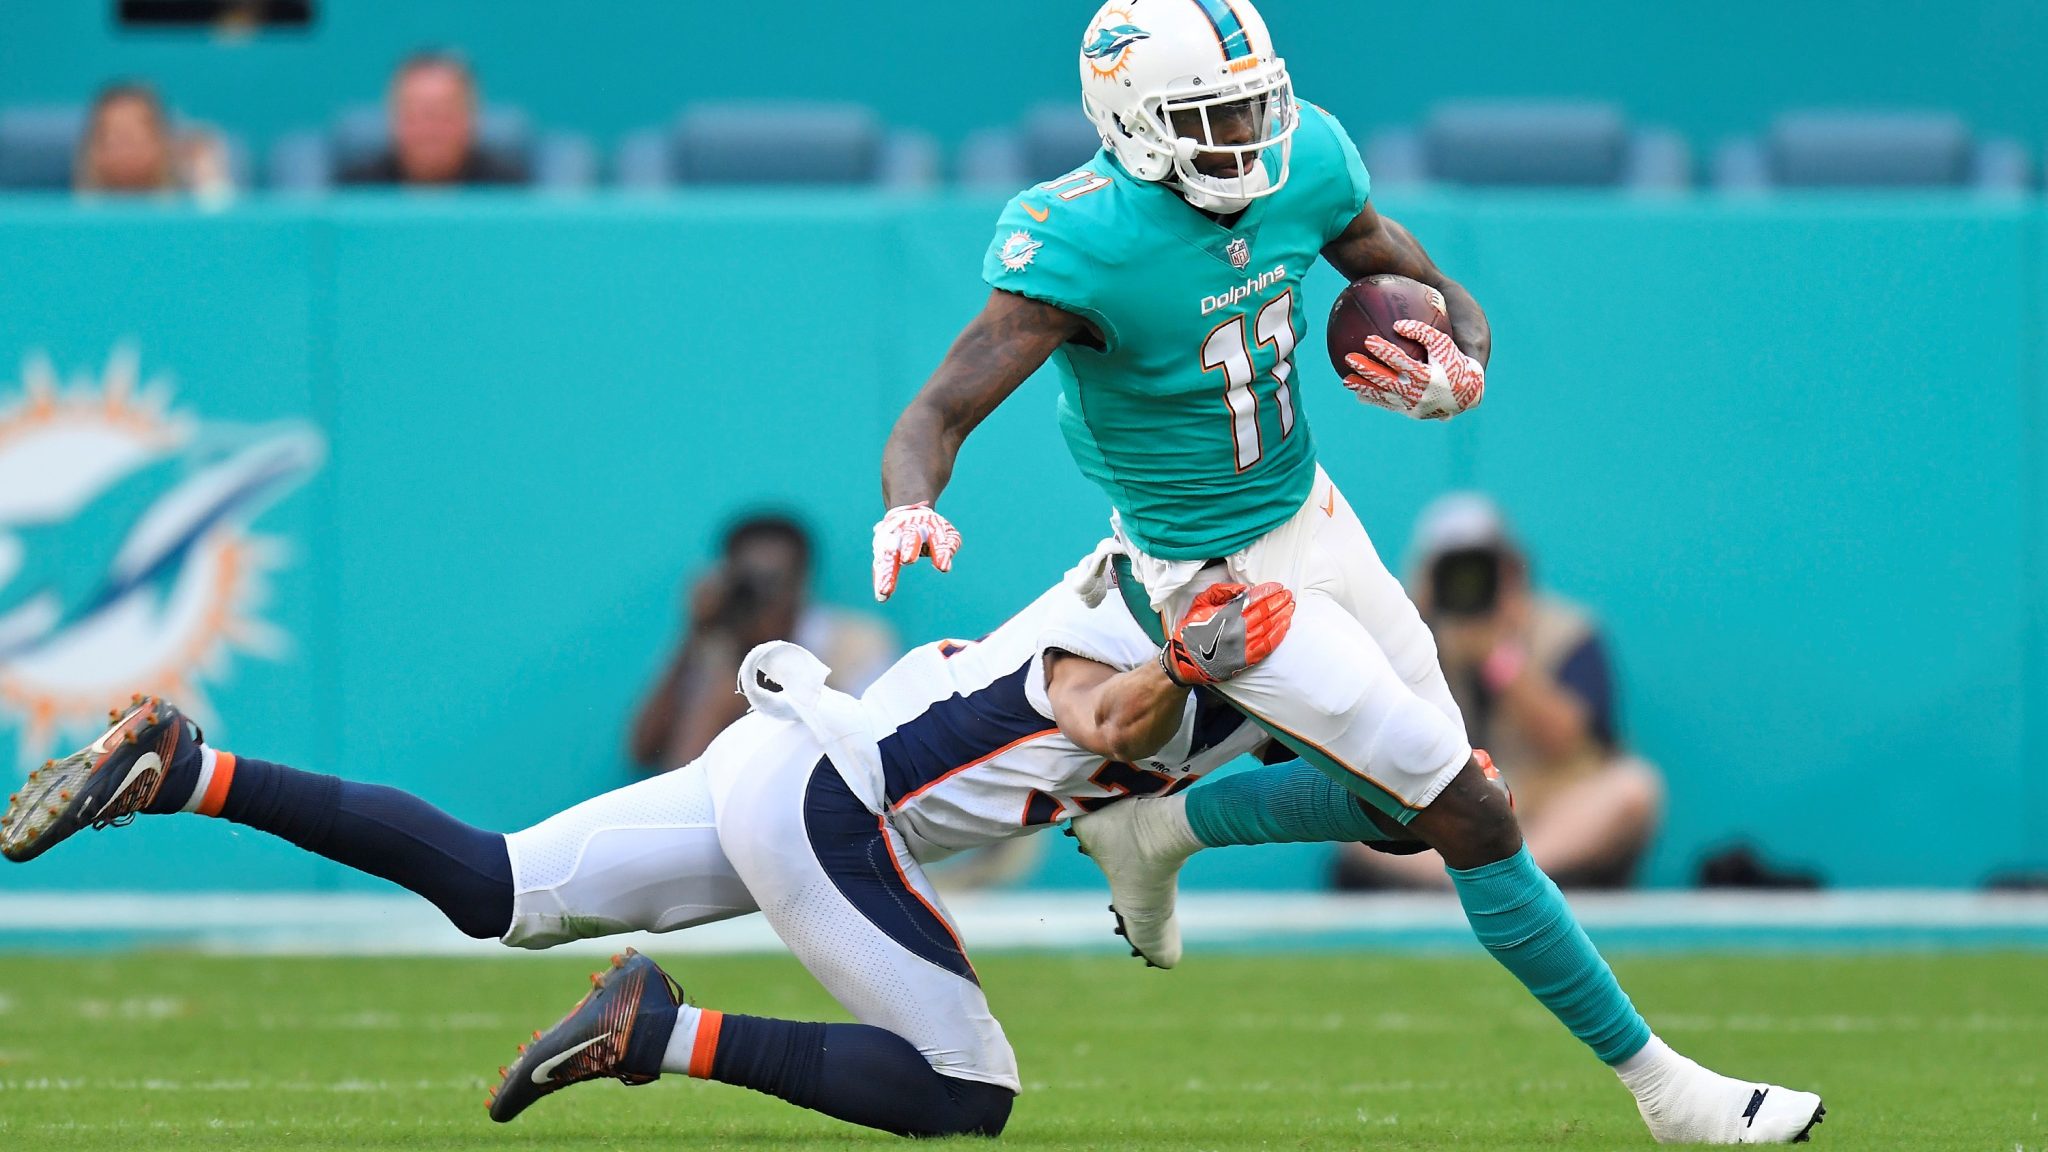 Dolphins vs Broncos live stream how to watch NFL week 11 game from